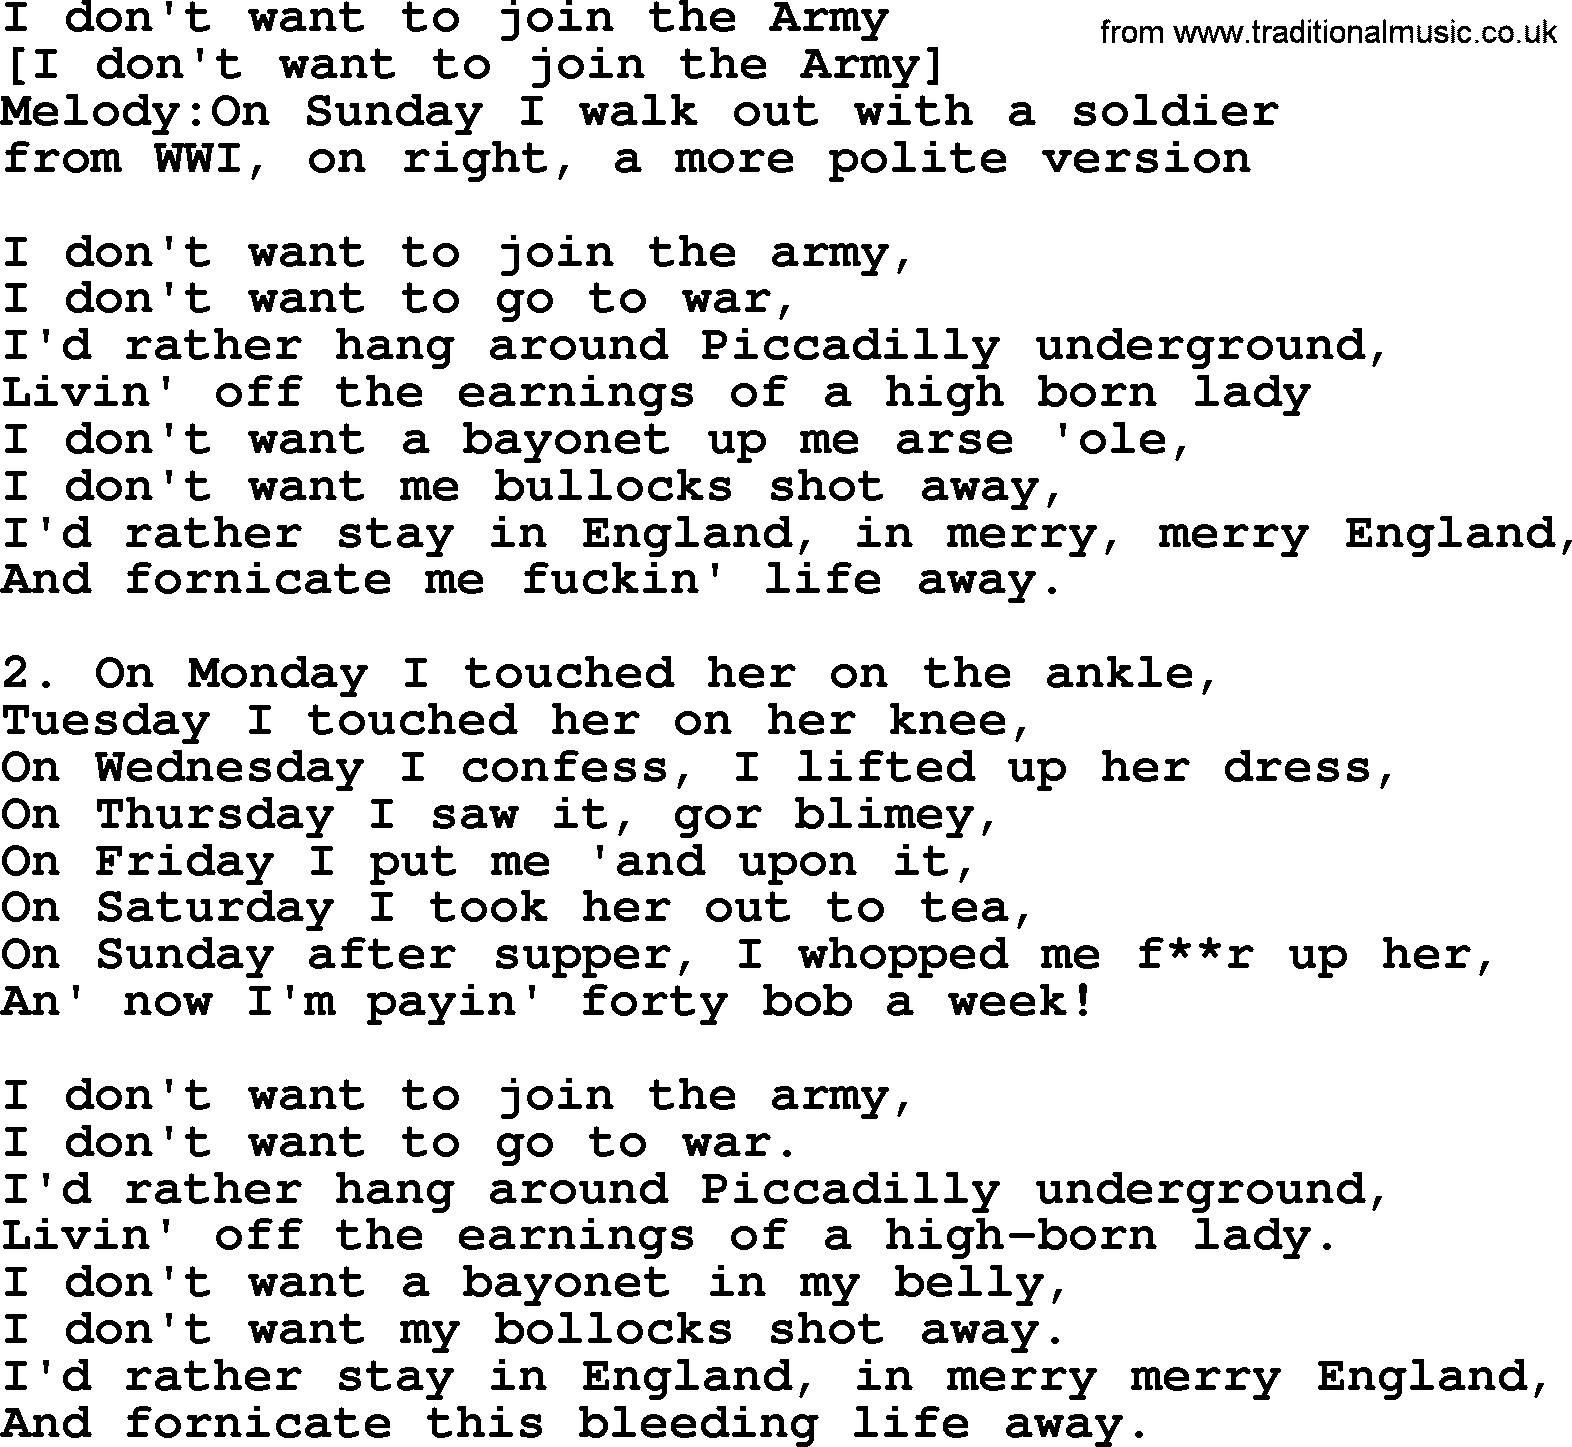 Old English Song: I Don't Want To Join The Army lyrics